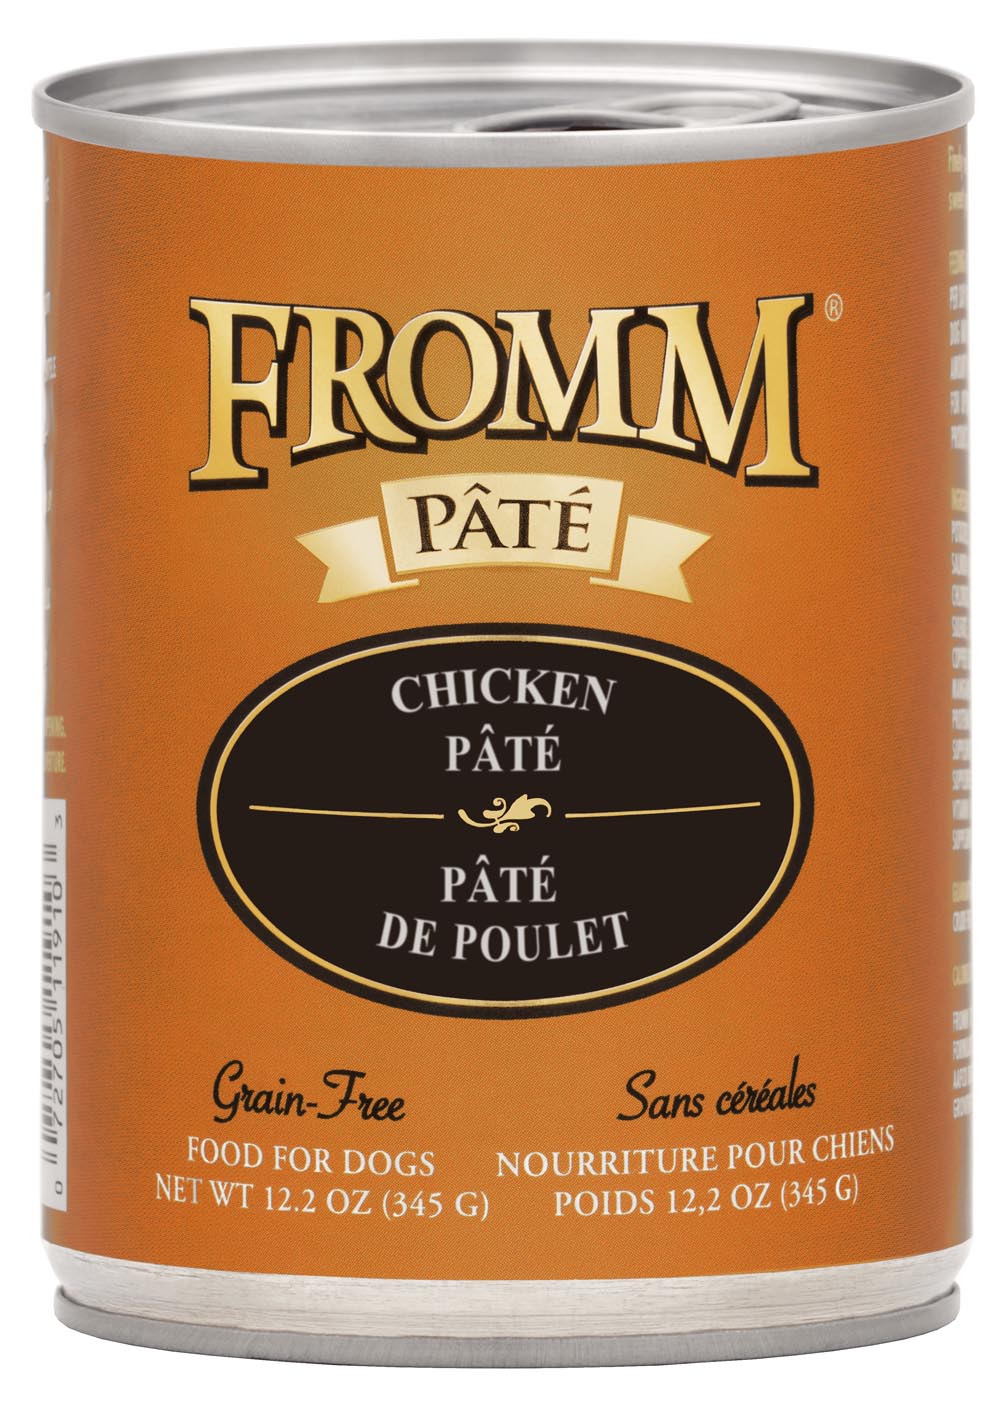 Fromm Chicken Pate Food for Dogs, 12.2 OZ